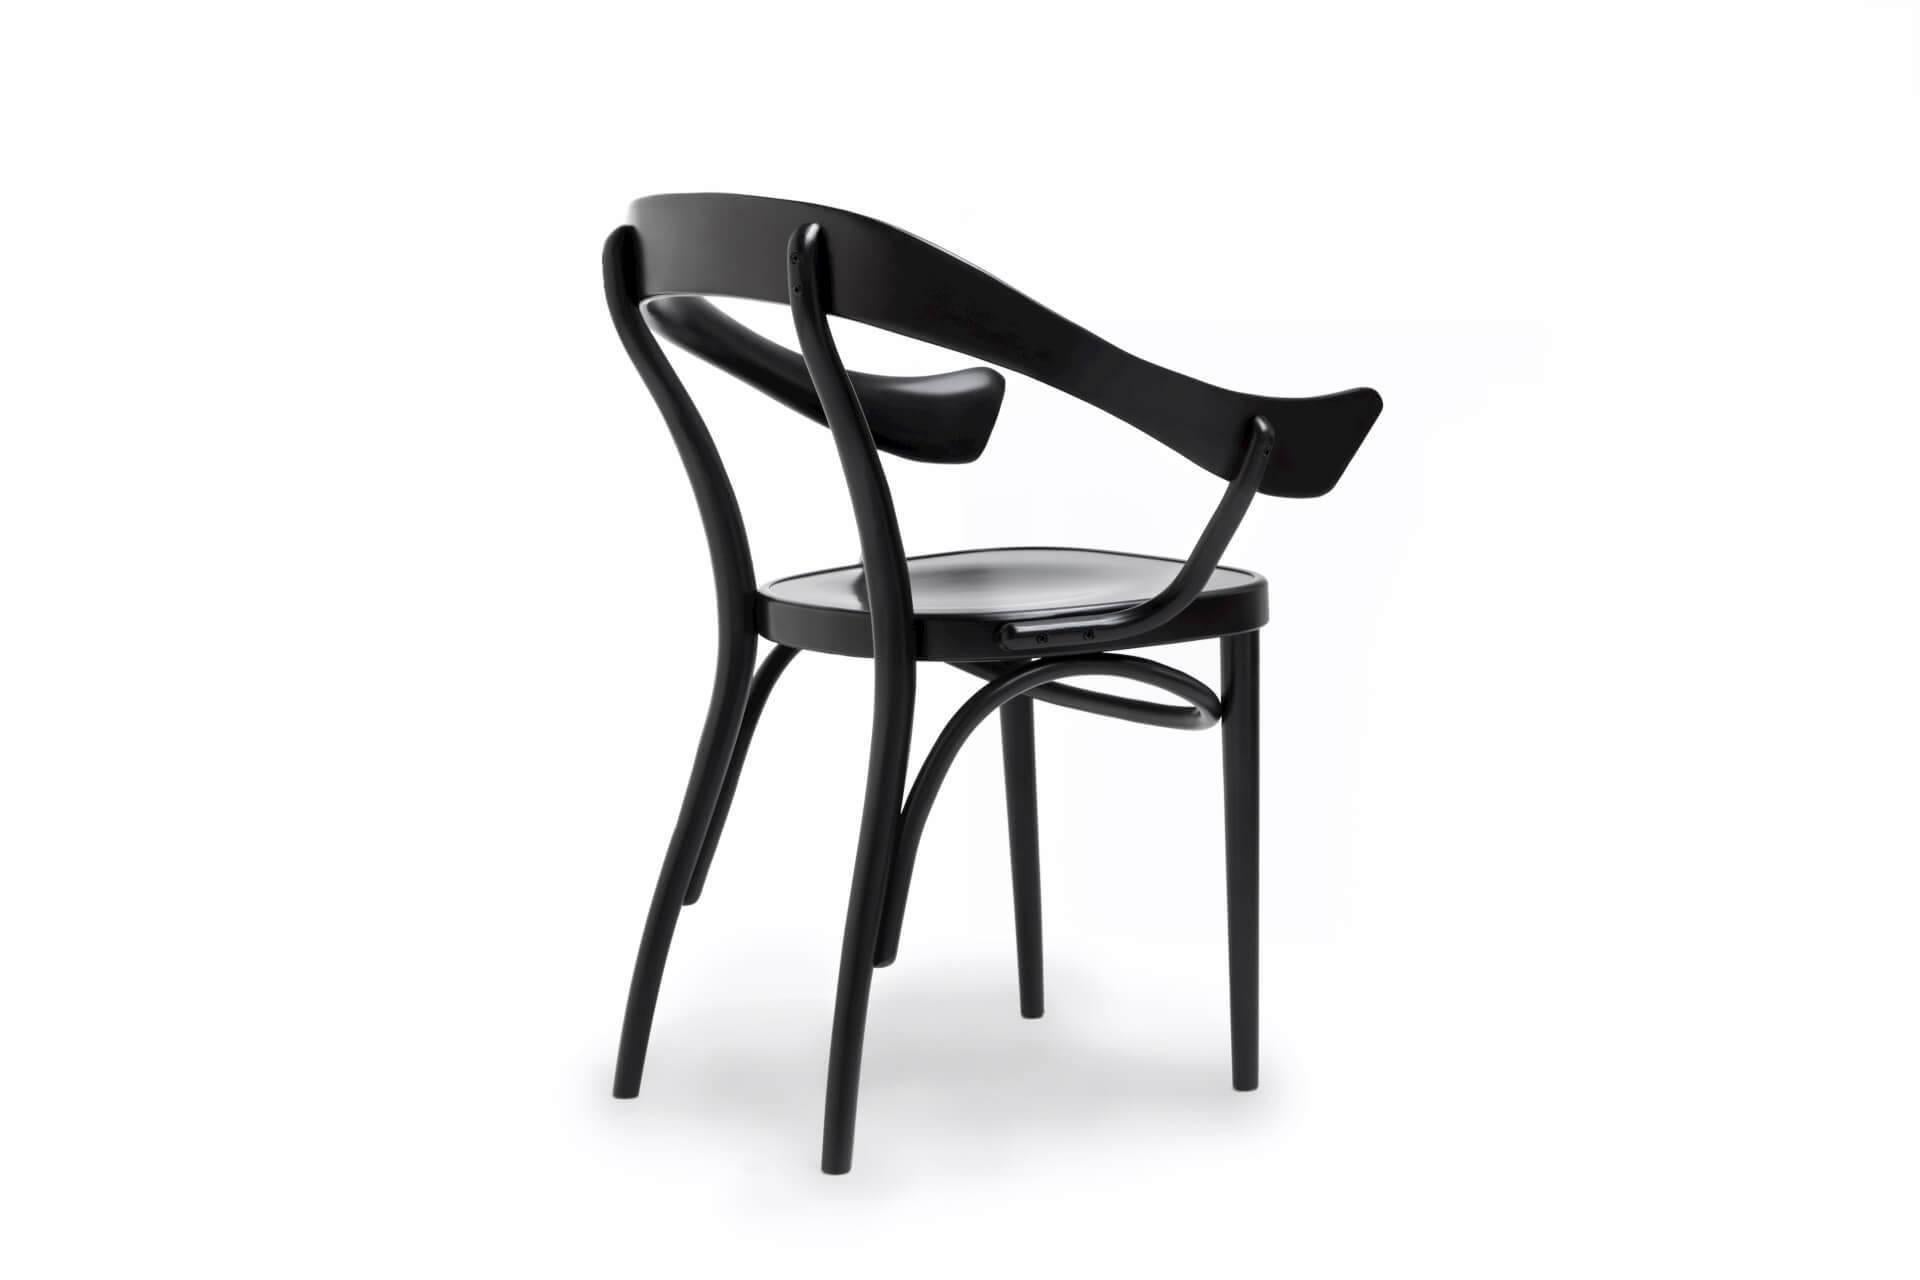 Nigel Coates presents the Bistrotstuhl lunch armchair, another exclusive contemporary interpretation of the traditional Thonet collection, which replicates the sinuous shapes of the Lehnstuhl lounge chair and the Body Stuhl chair. This is an